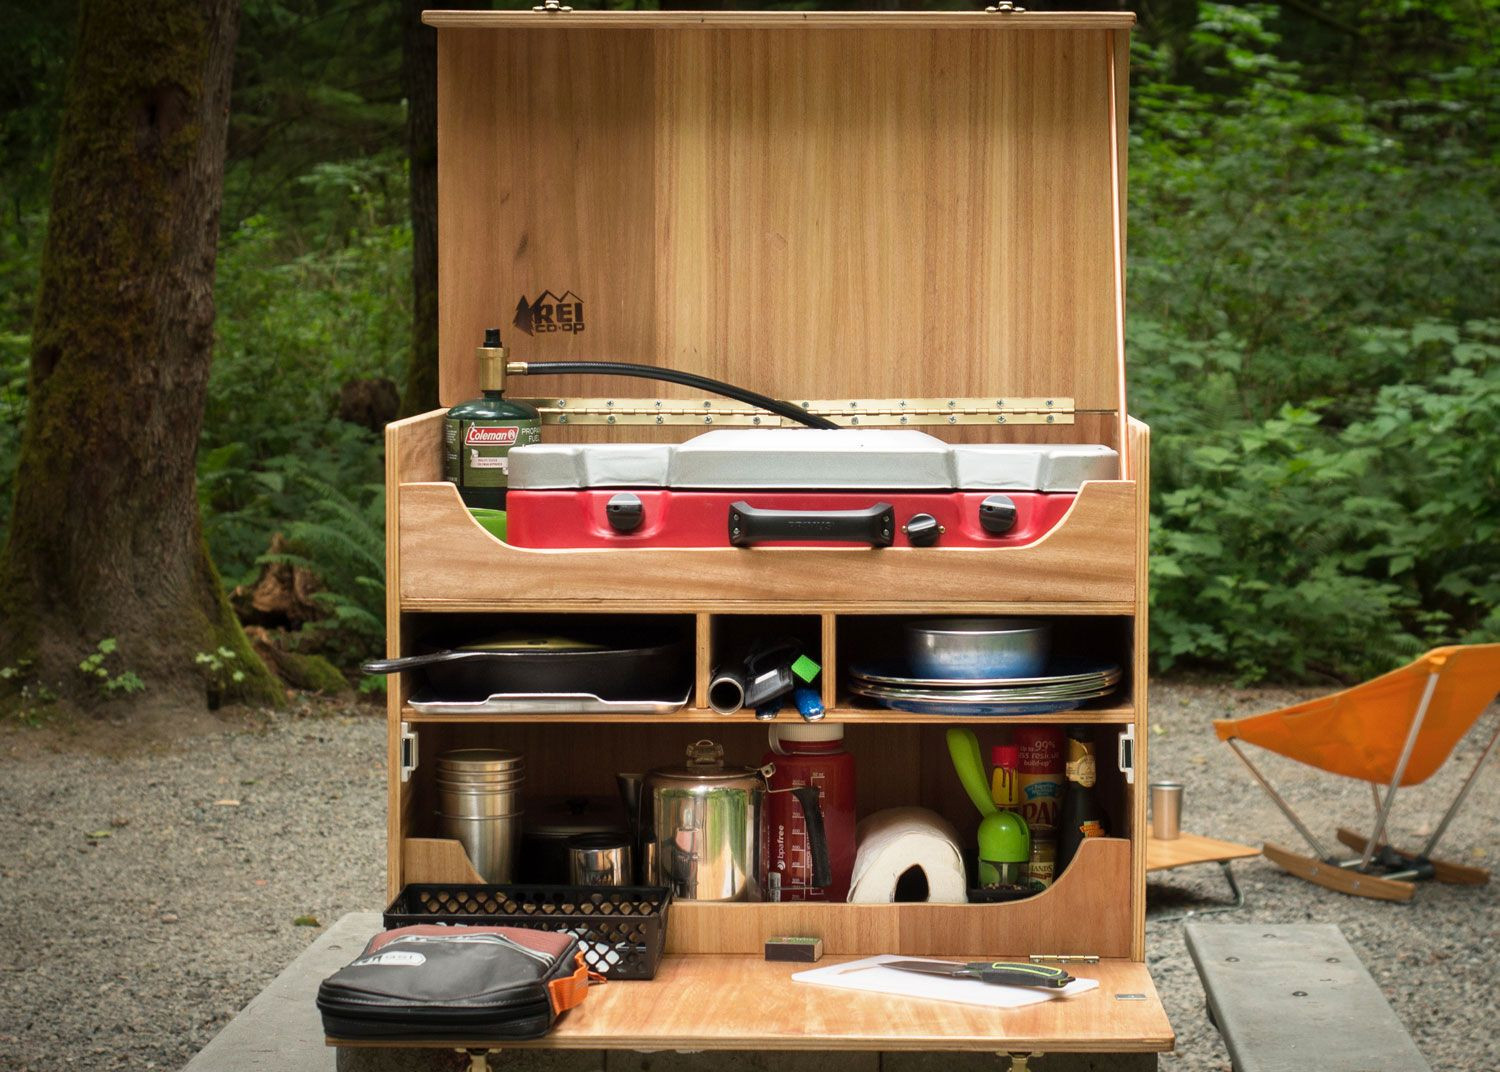 DIY Camp Kitchen Box
 How to Build Your Own Camp Kitchen Chuck Box